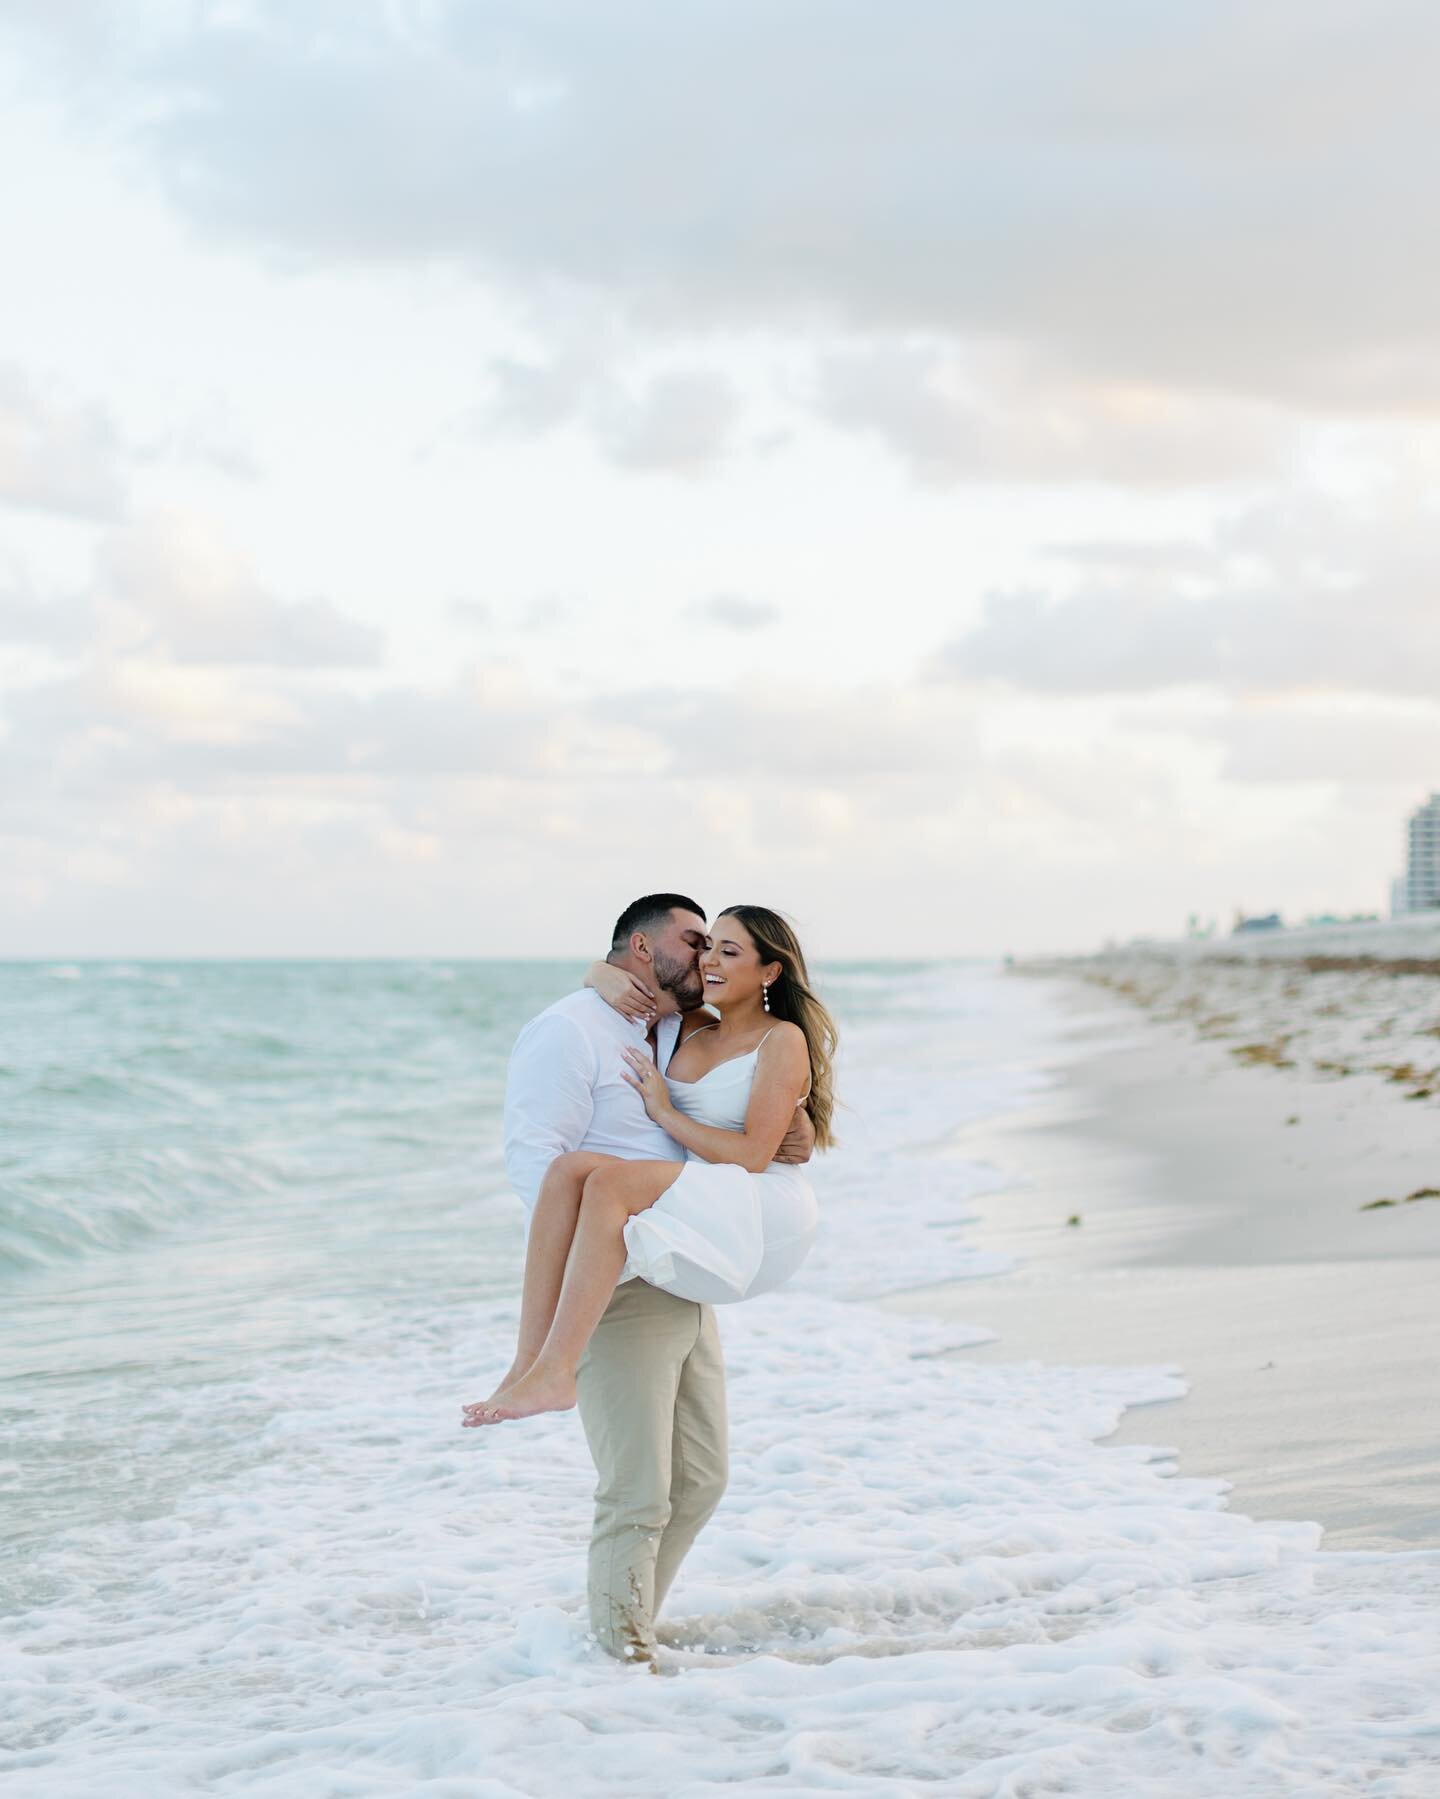 A glimpse into Stefanie &amp; Nick's dreamy engagement shoot with @thecardonas🤍 

We seriously can't wait to bring their dream wedding to life! 

#amararoseevents #wedding #luxurywedding #editorialwedding #miamiwedding #weddingplanner #luxurywedding